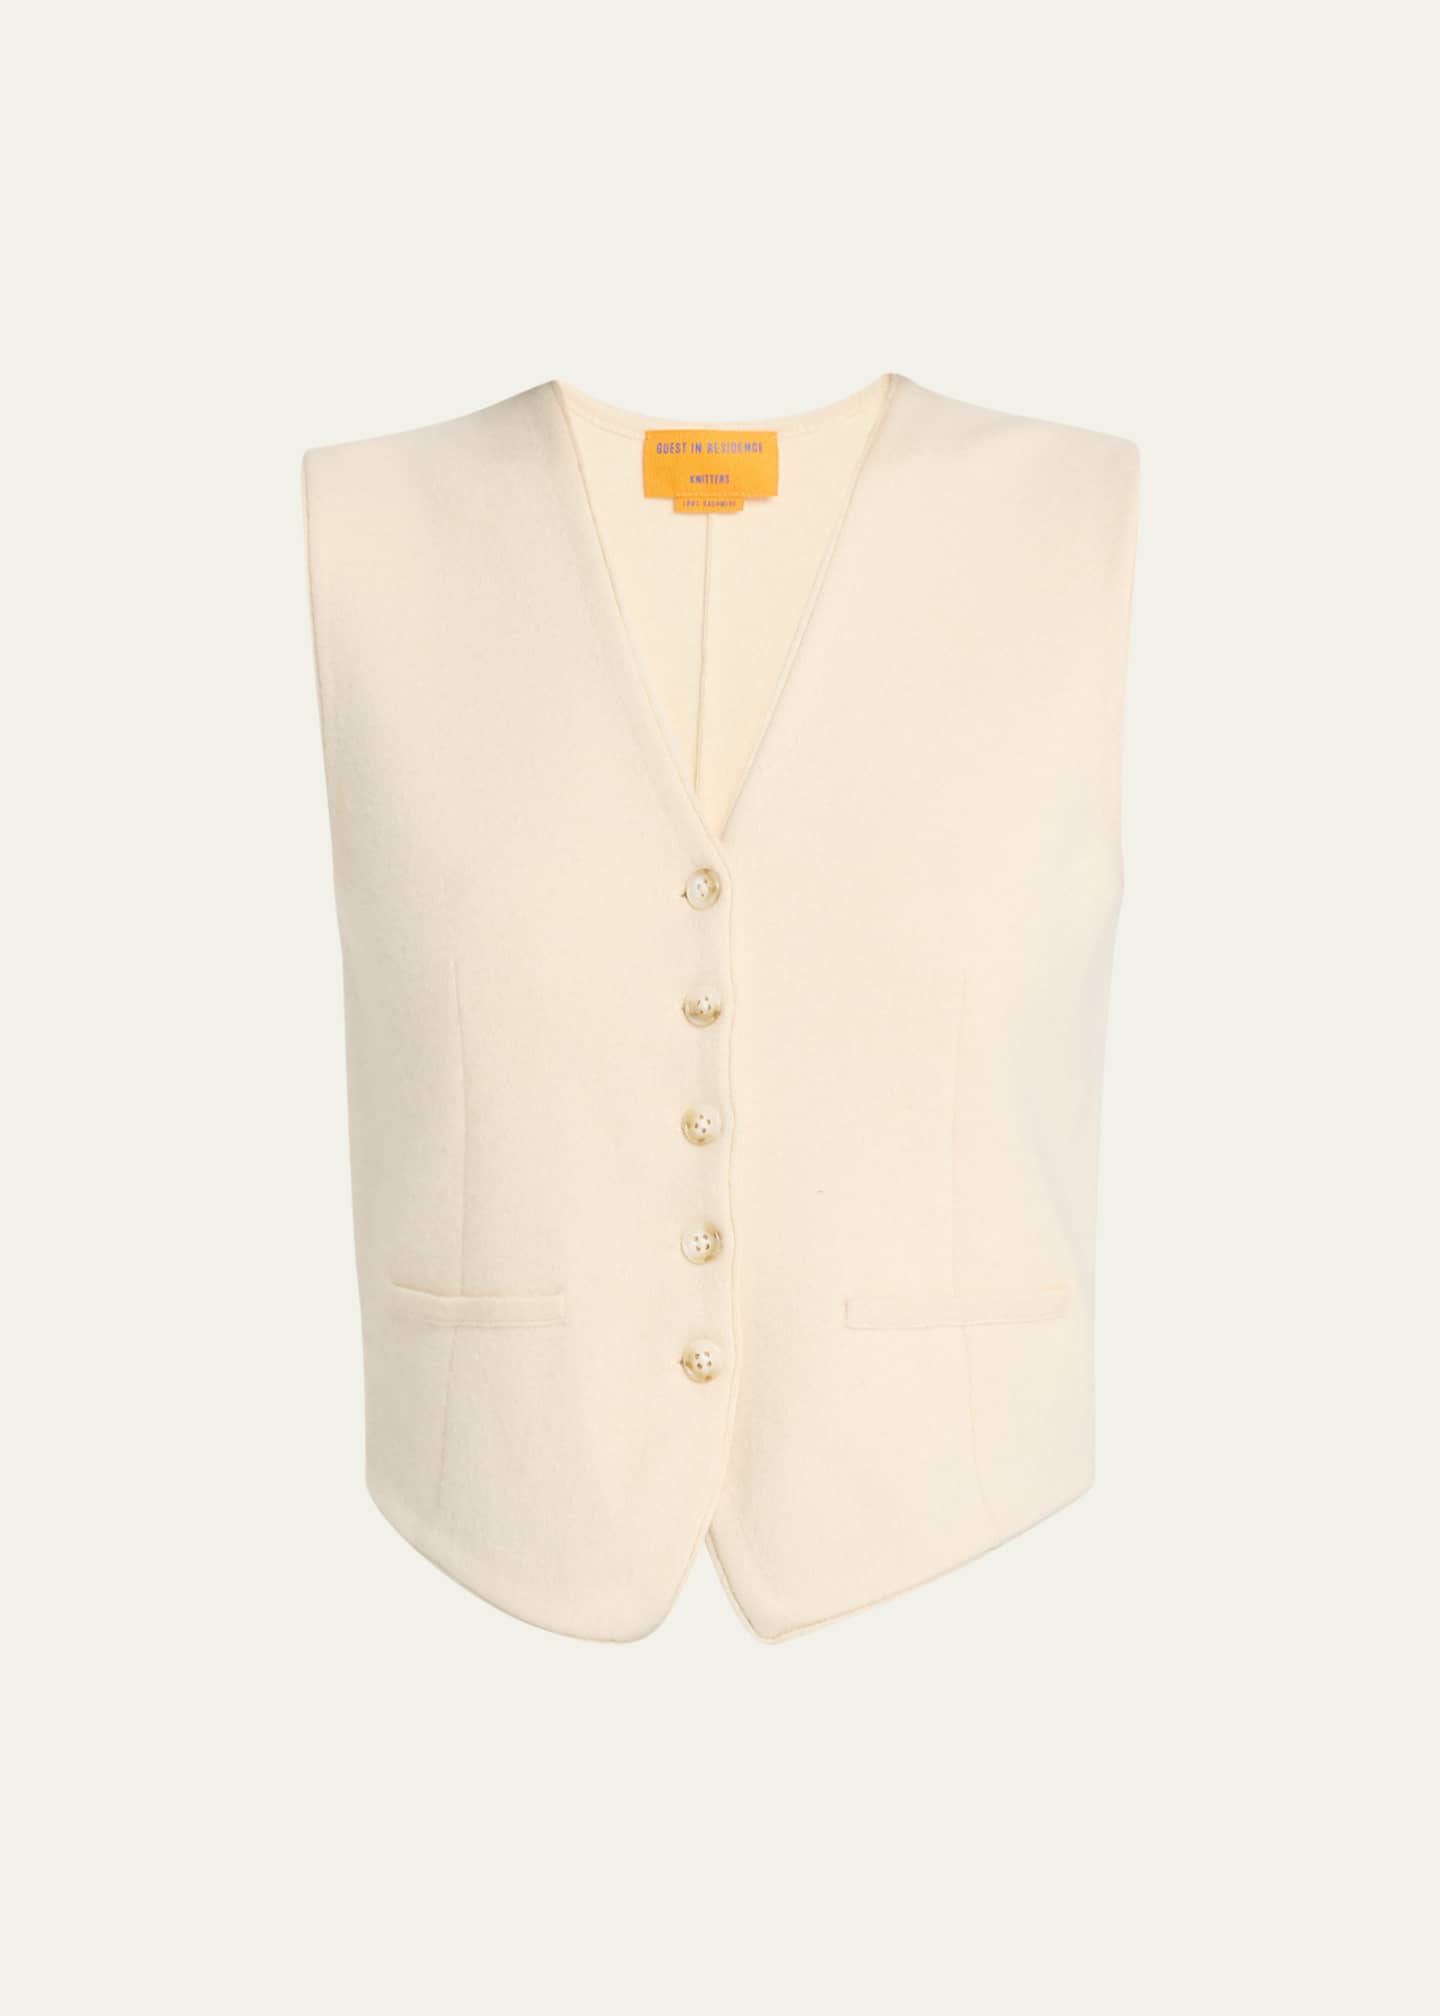 Guest in Residence Tailored Cashmere Vest - Bergdorf Goodman